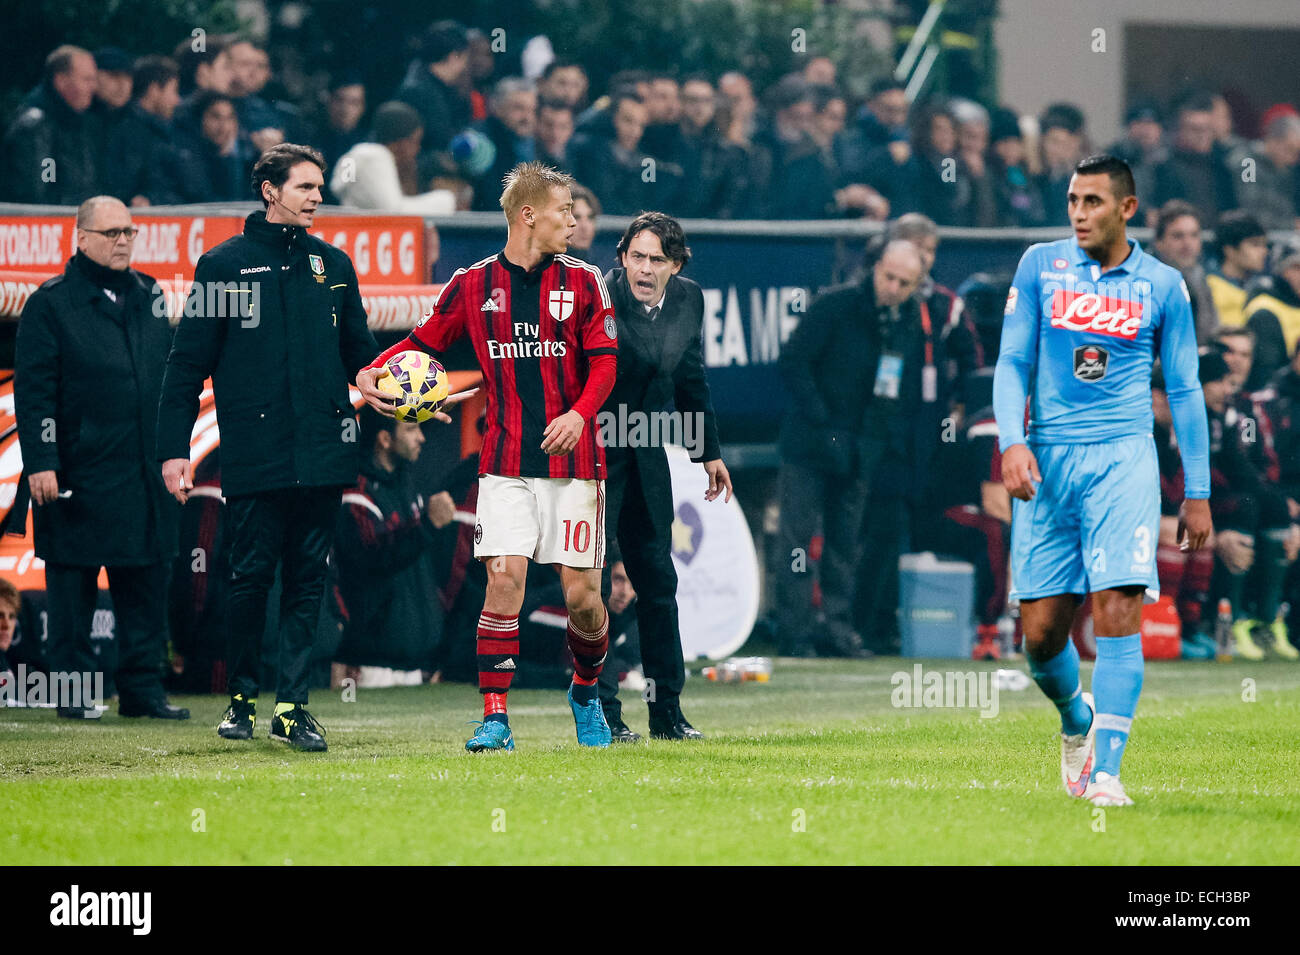 Milan, Italy. 14th Dec, 2014. Keisuke Honda, Filippo Inzaghi (AC Milan) Football/Soccer : Keisuke Honda of AC Milan and manager Filippo Inzaghi during the Serie A match between AC Milan and Napoli at San Siro in Milan, Italy . © AFLO/Alamy Live News Stock Photo